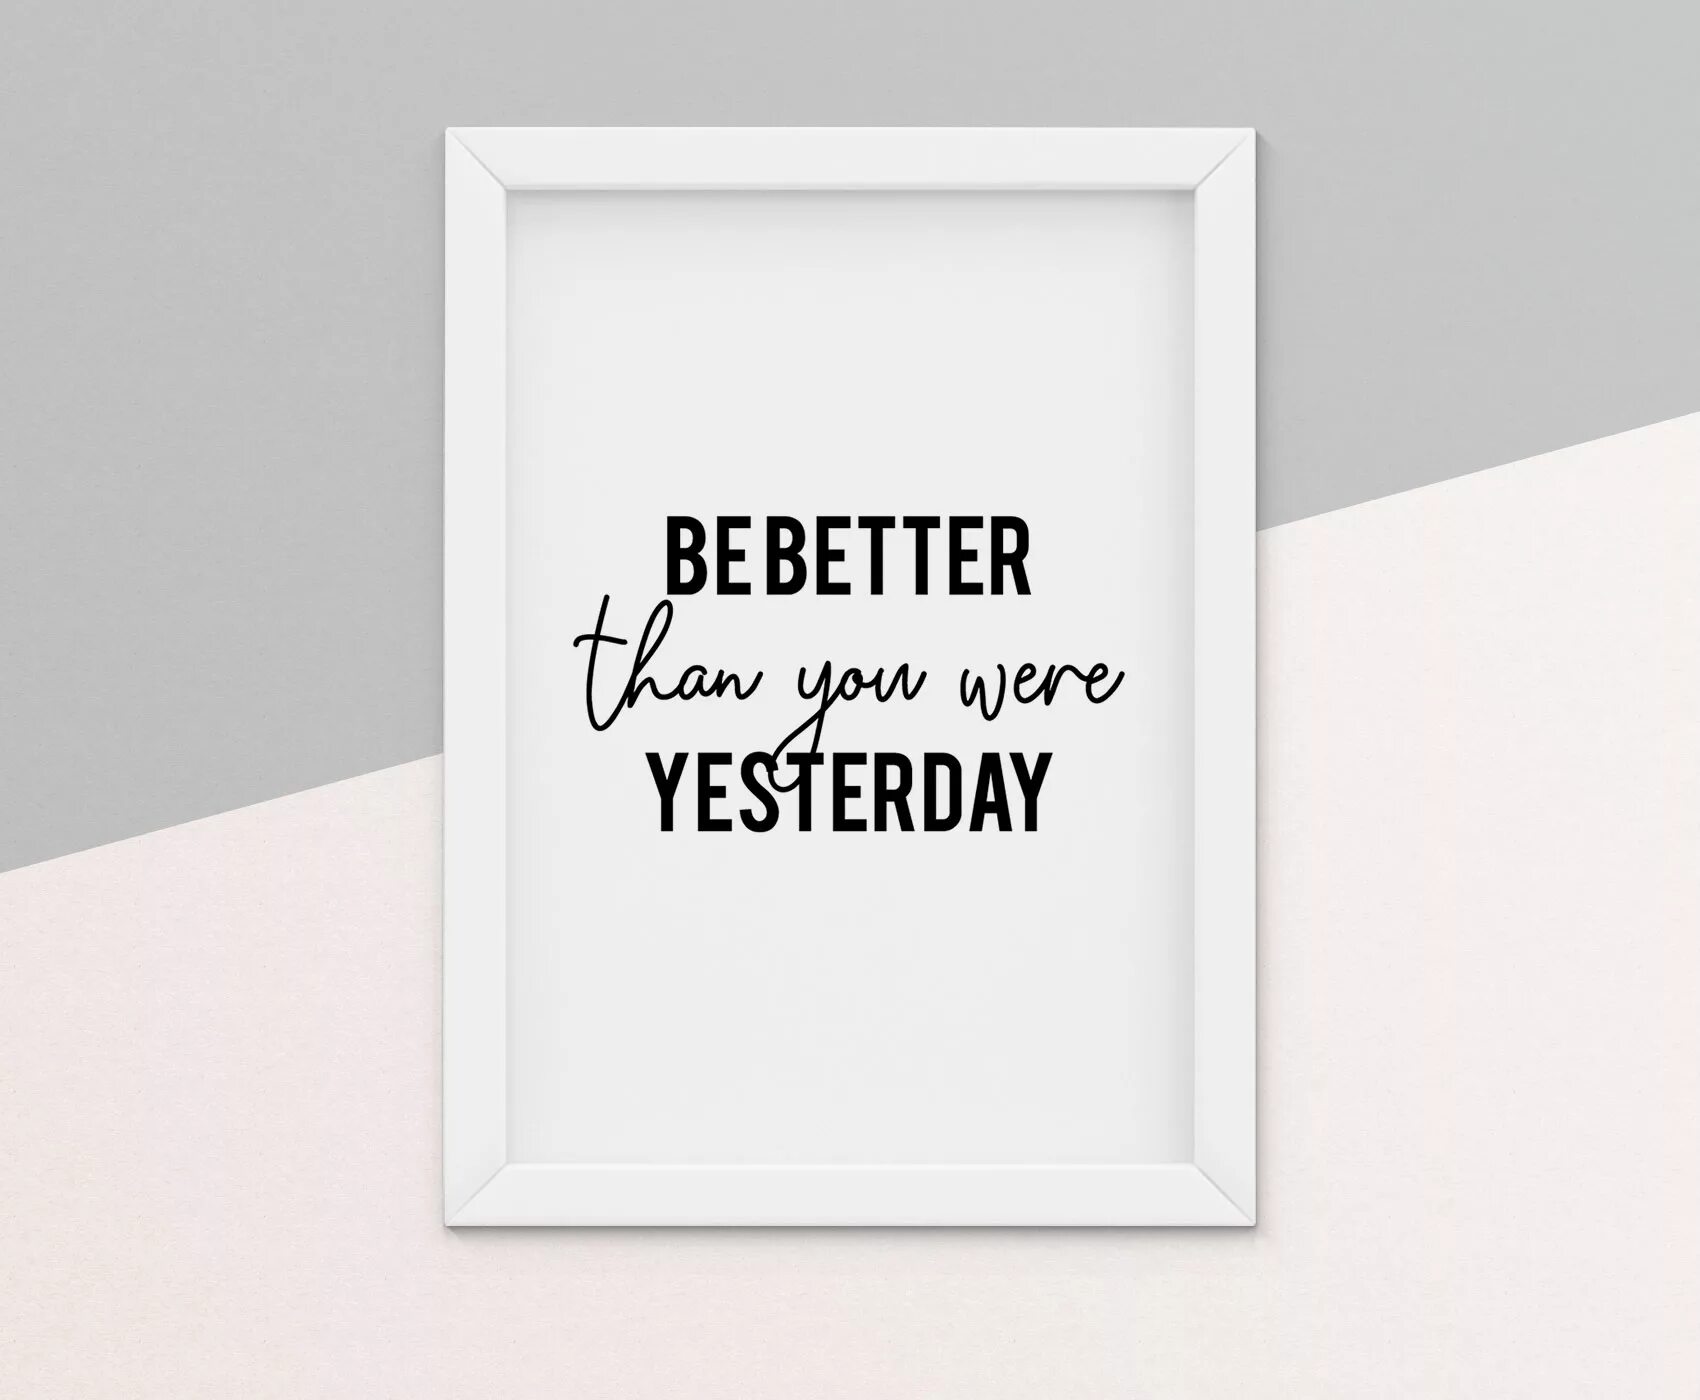 Yesterday my life was. Better than yesterday. Be better than you were yesterday. Better than yesterday обои. Yesterday картинка.